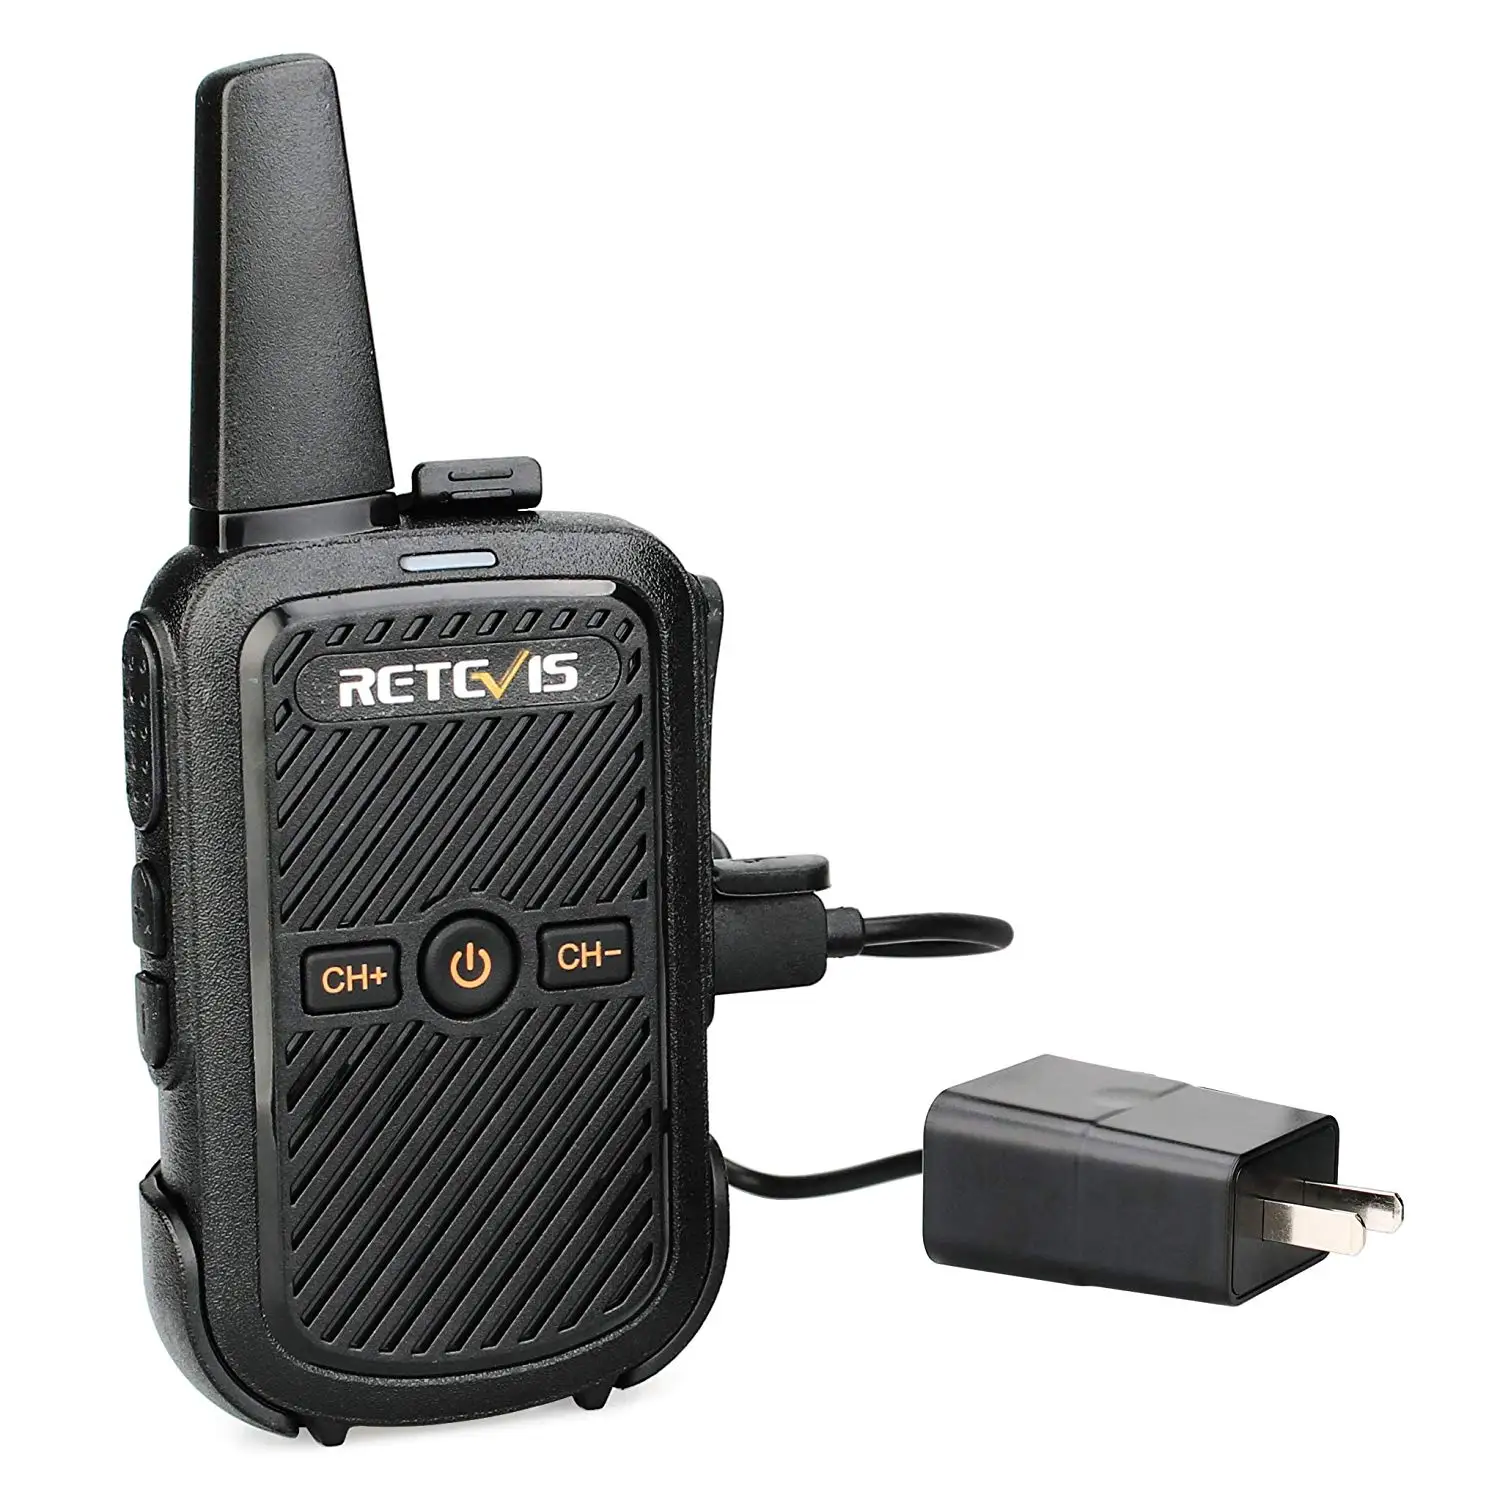 Retevis RT15 Professional Mini Commercial Walkie Talkie Analog Two Way Radio 2W 16CH UHF400-470MHz VOX TOT Monitor CTCSS/DCS